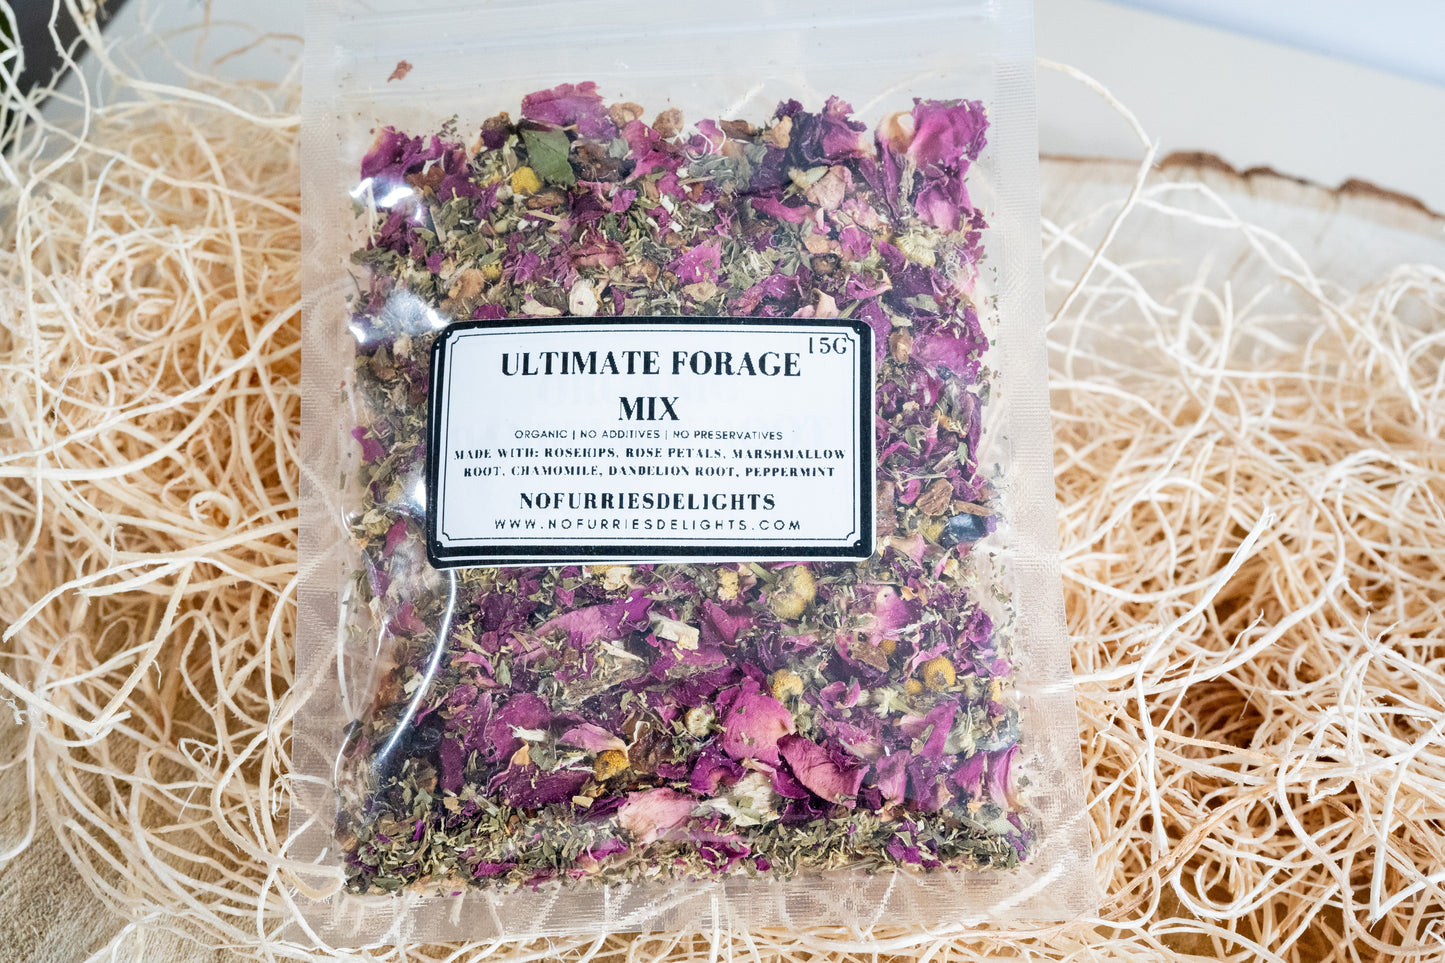 Forage mix made with rosehips, rose petals, marshmallow root, chamomile, dandelion root and peppermint for small pets and birds.